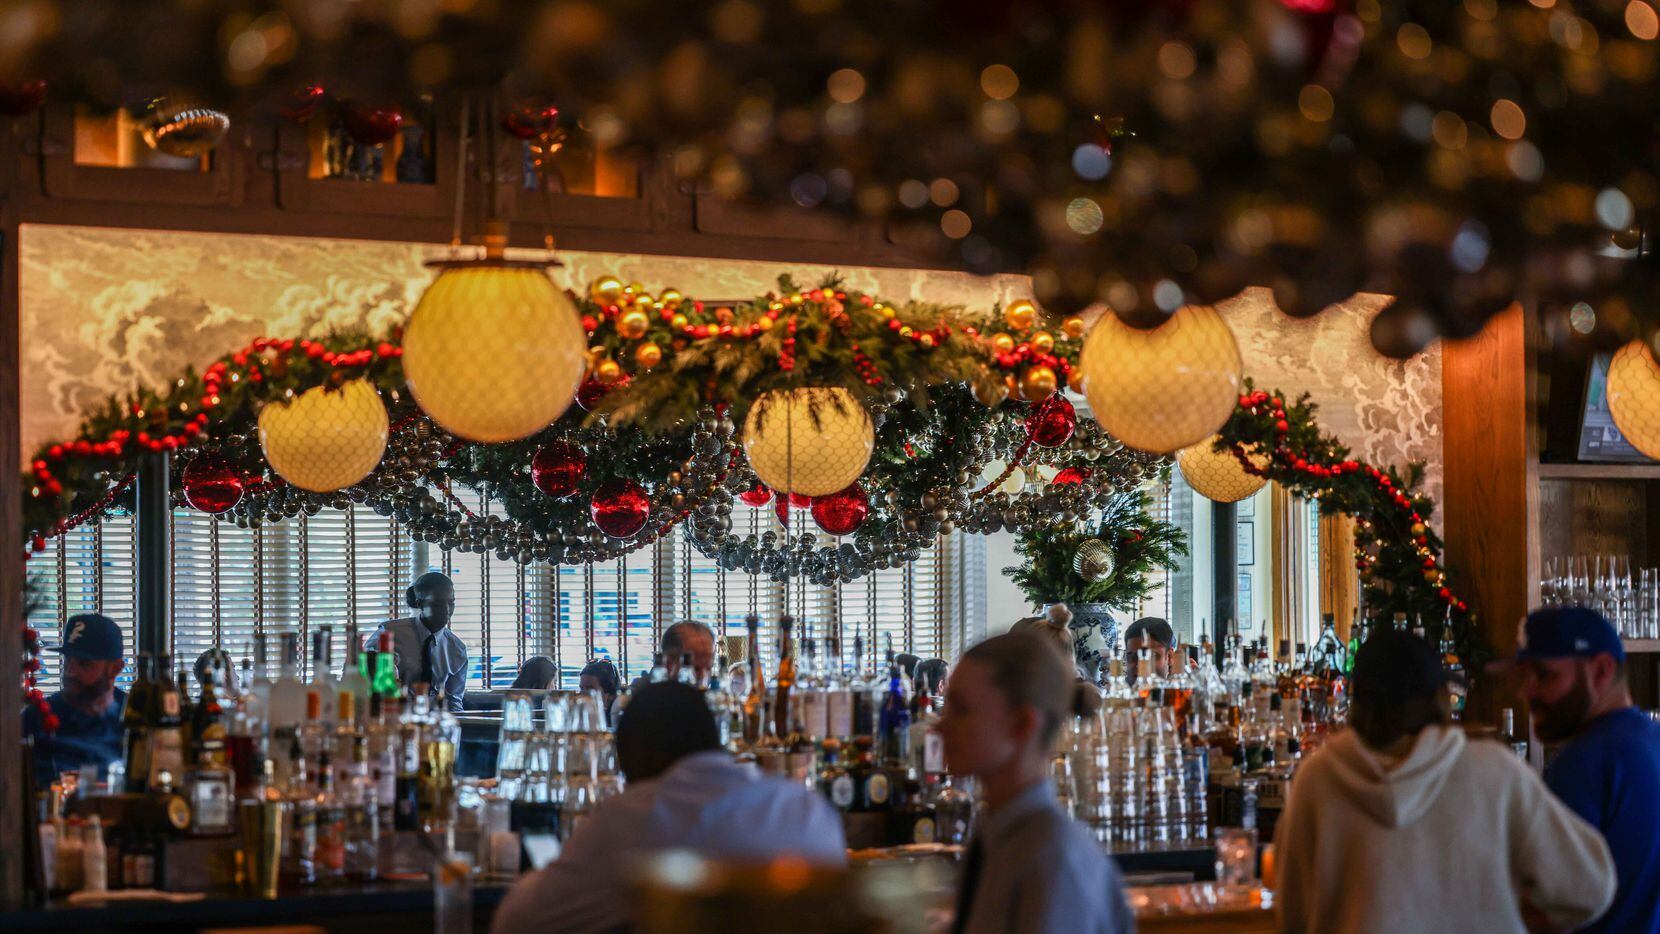 Can you feel the spirit? Hudson House on Lovers Lane has decked its halls, just in time for the holidays. It's one of 20 hot restaurants in Dallas-Fort Worth in December 2021.